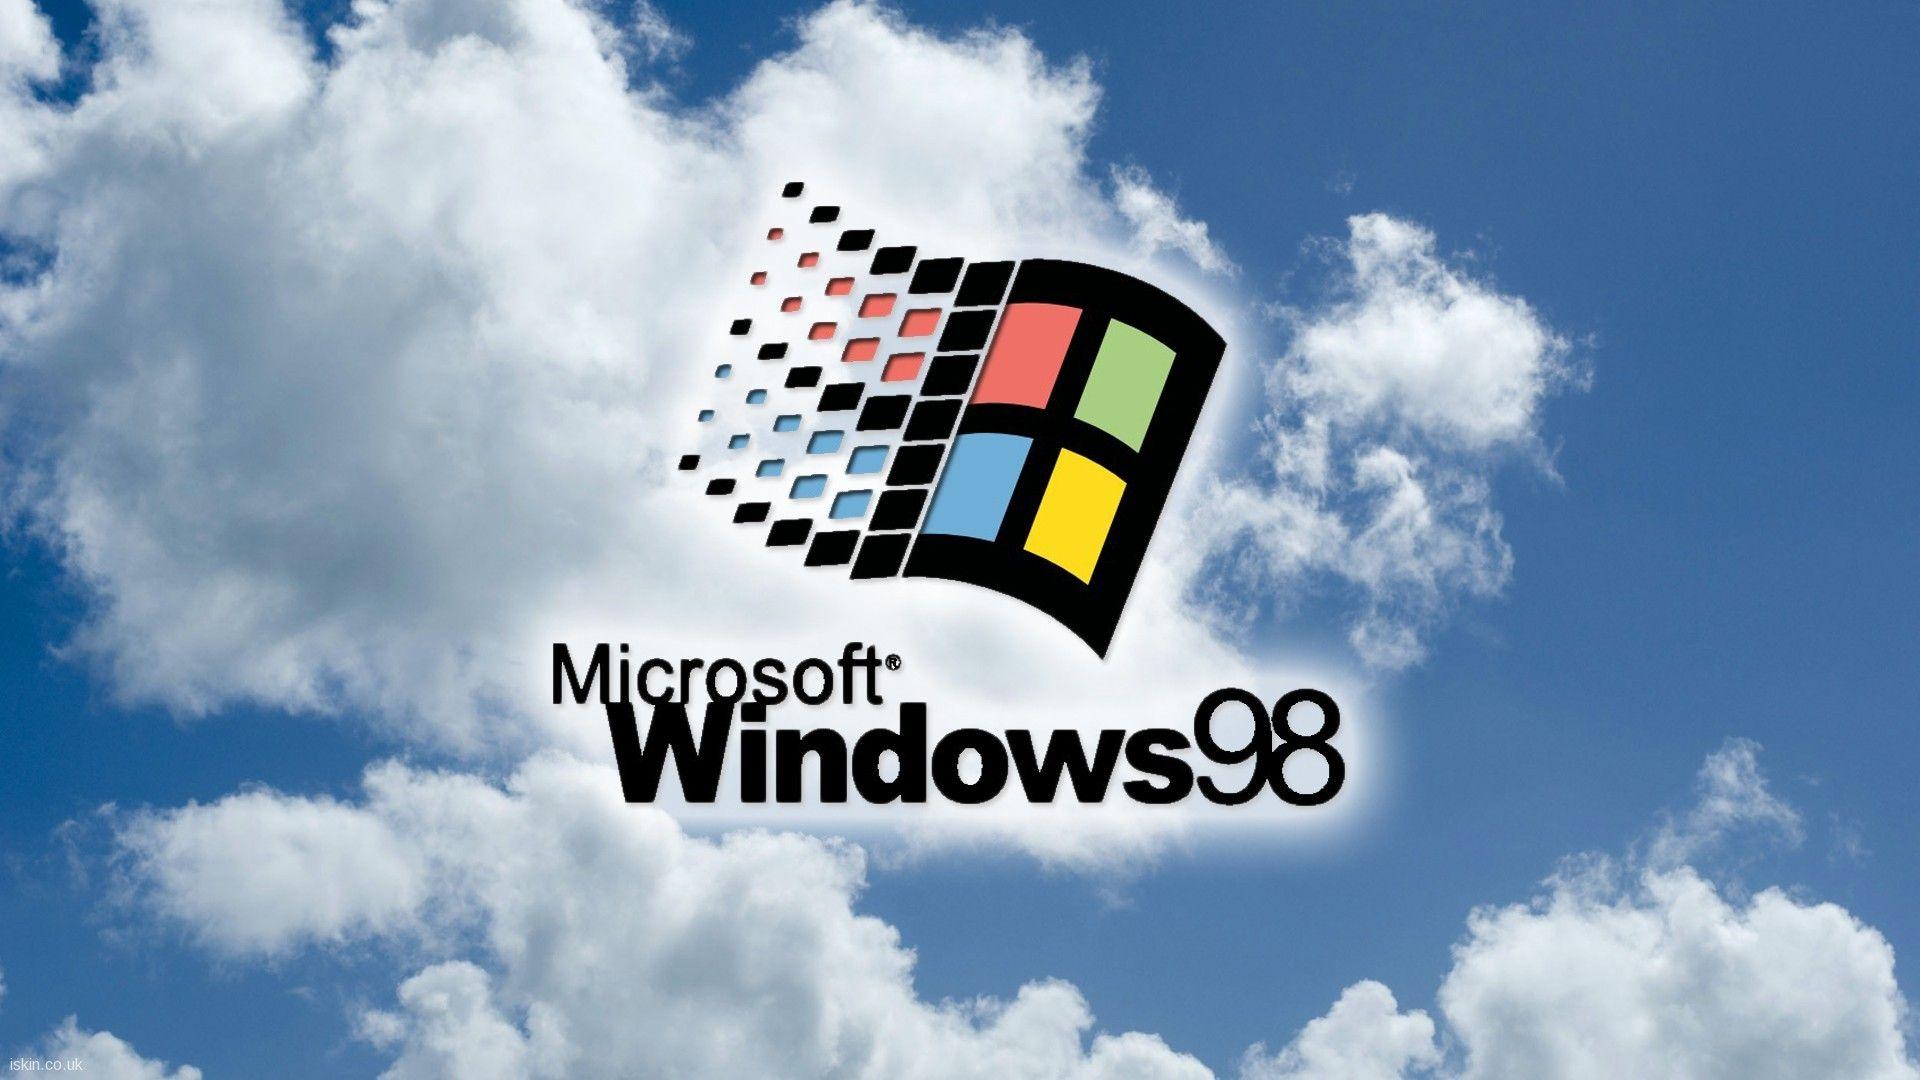 Windows 98 Logo - Windows 98 wallpaper ·① Download free amazing HD backgrounds for ...